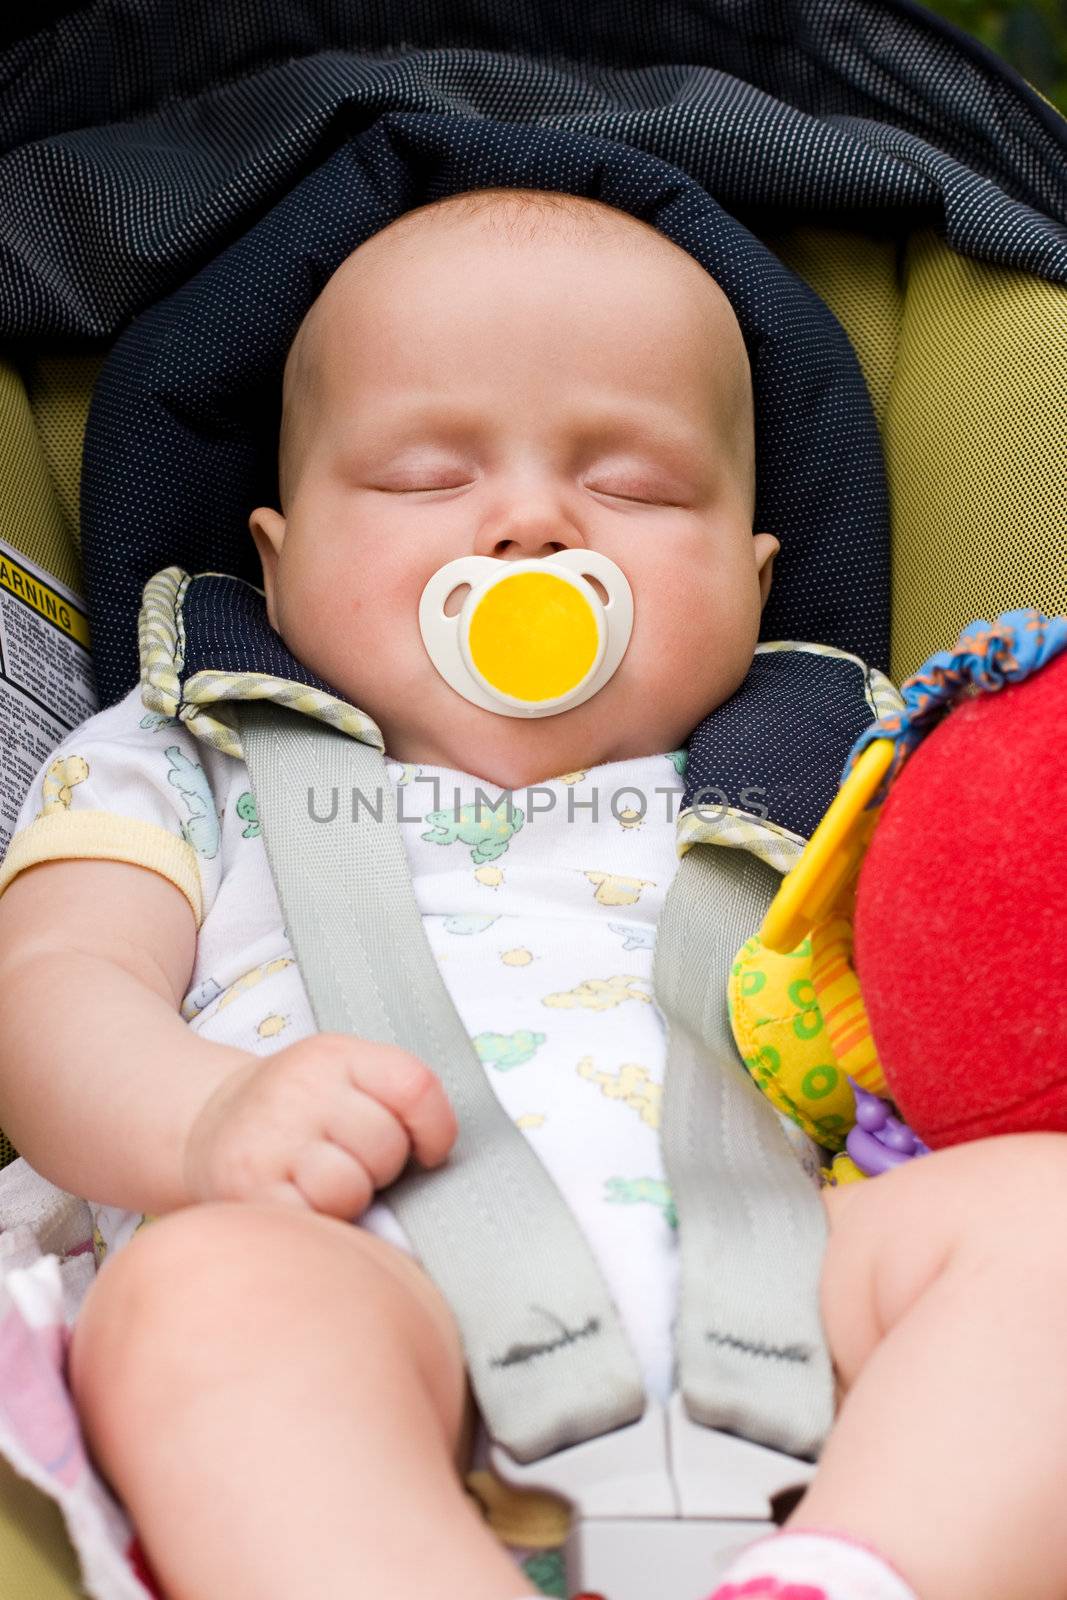 Baby sleeping in a car seat by naumoid